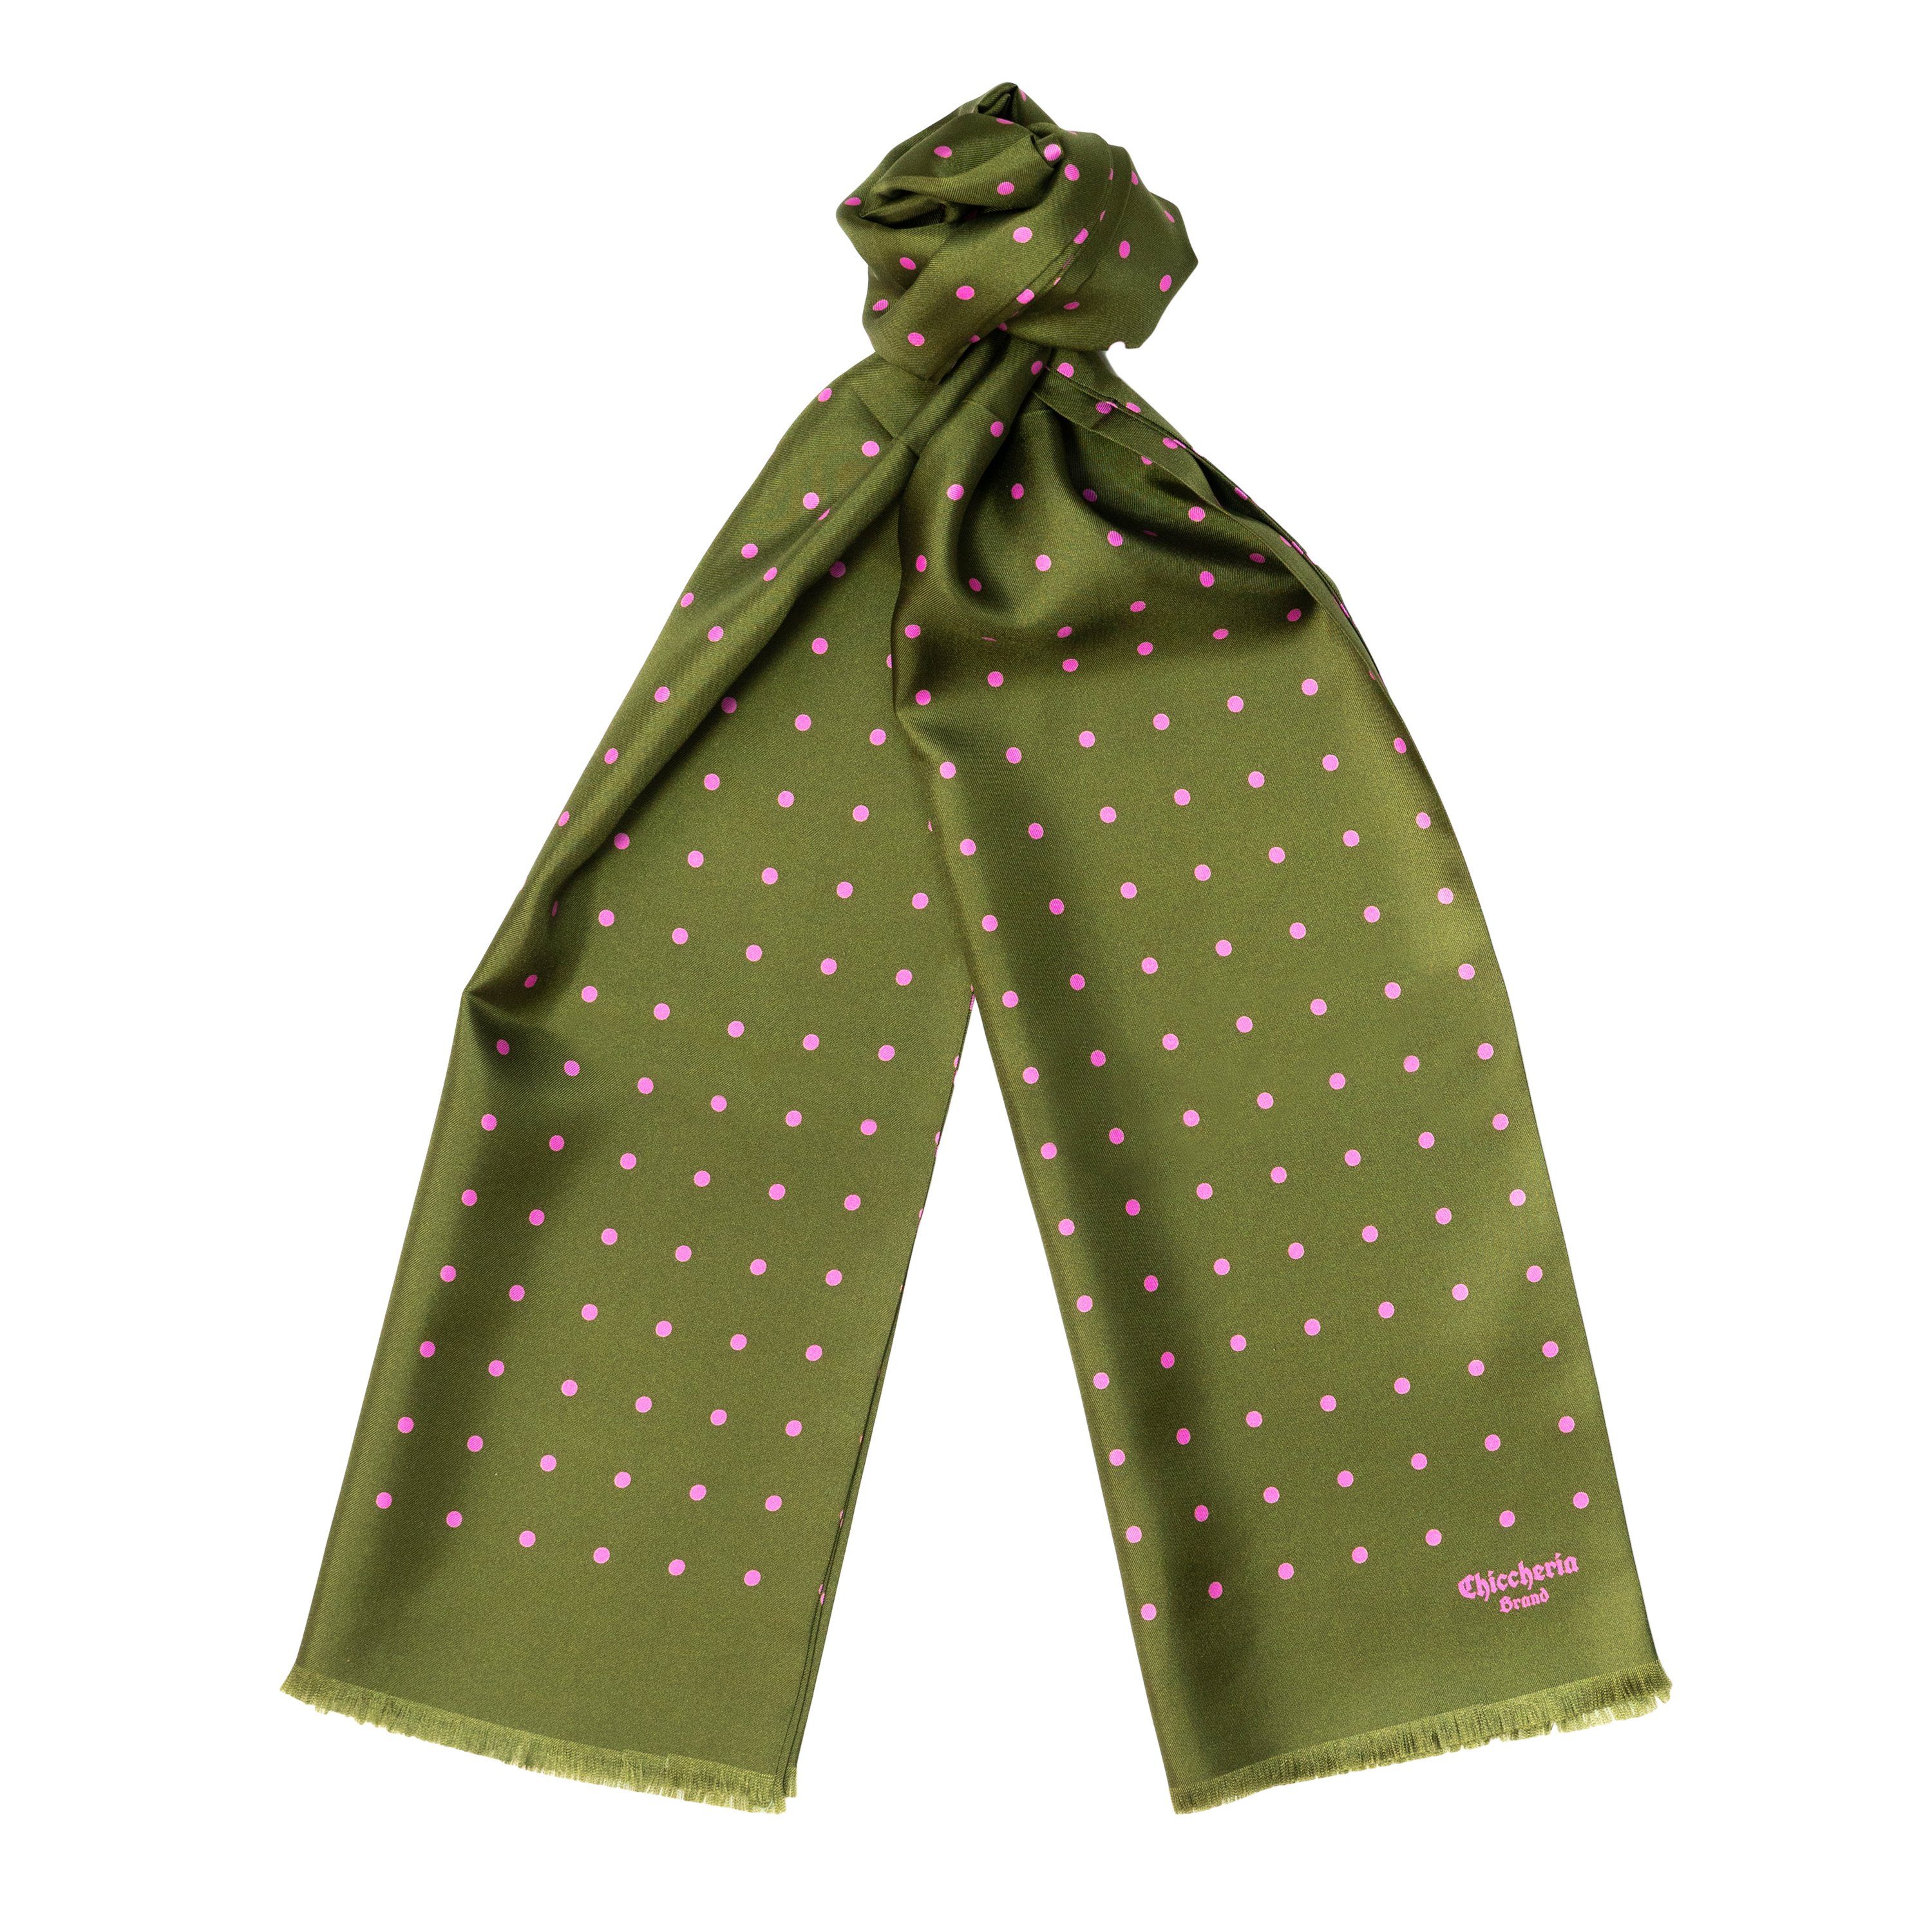 Chiccheria Brand Seidenschal BIG-DOTS, Made Oliv in Italy